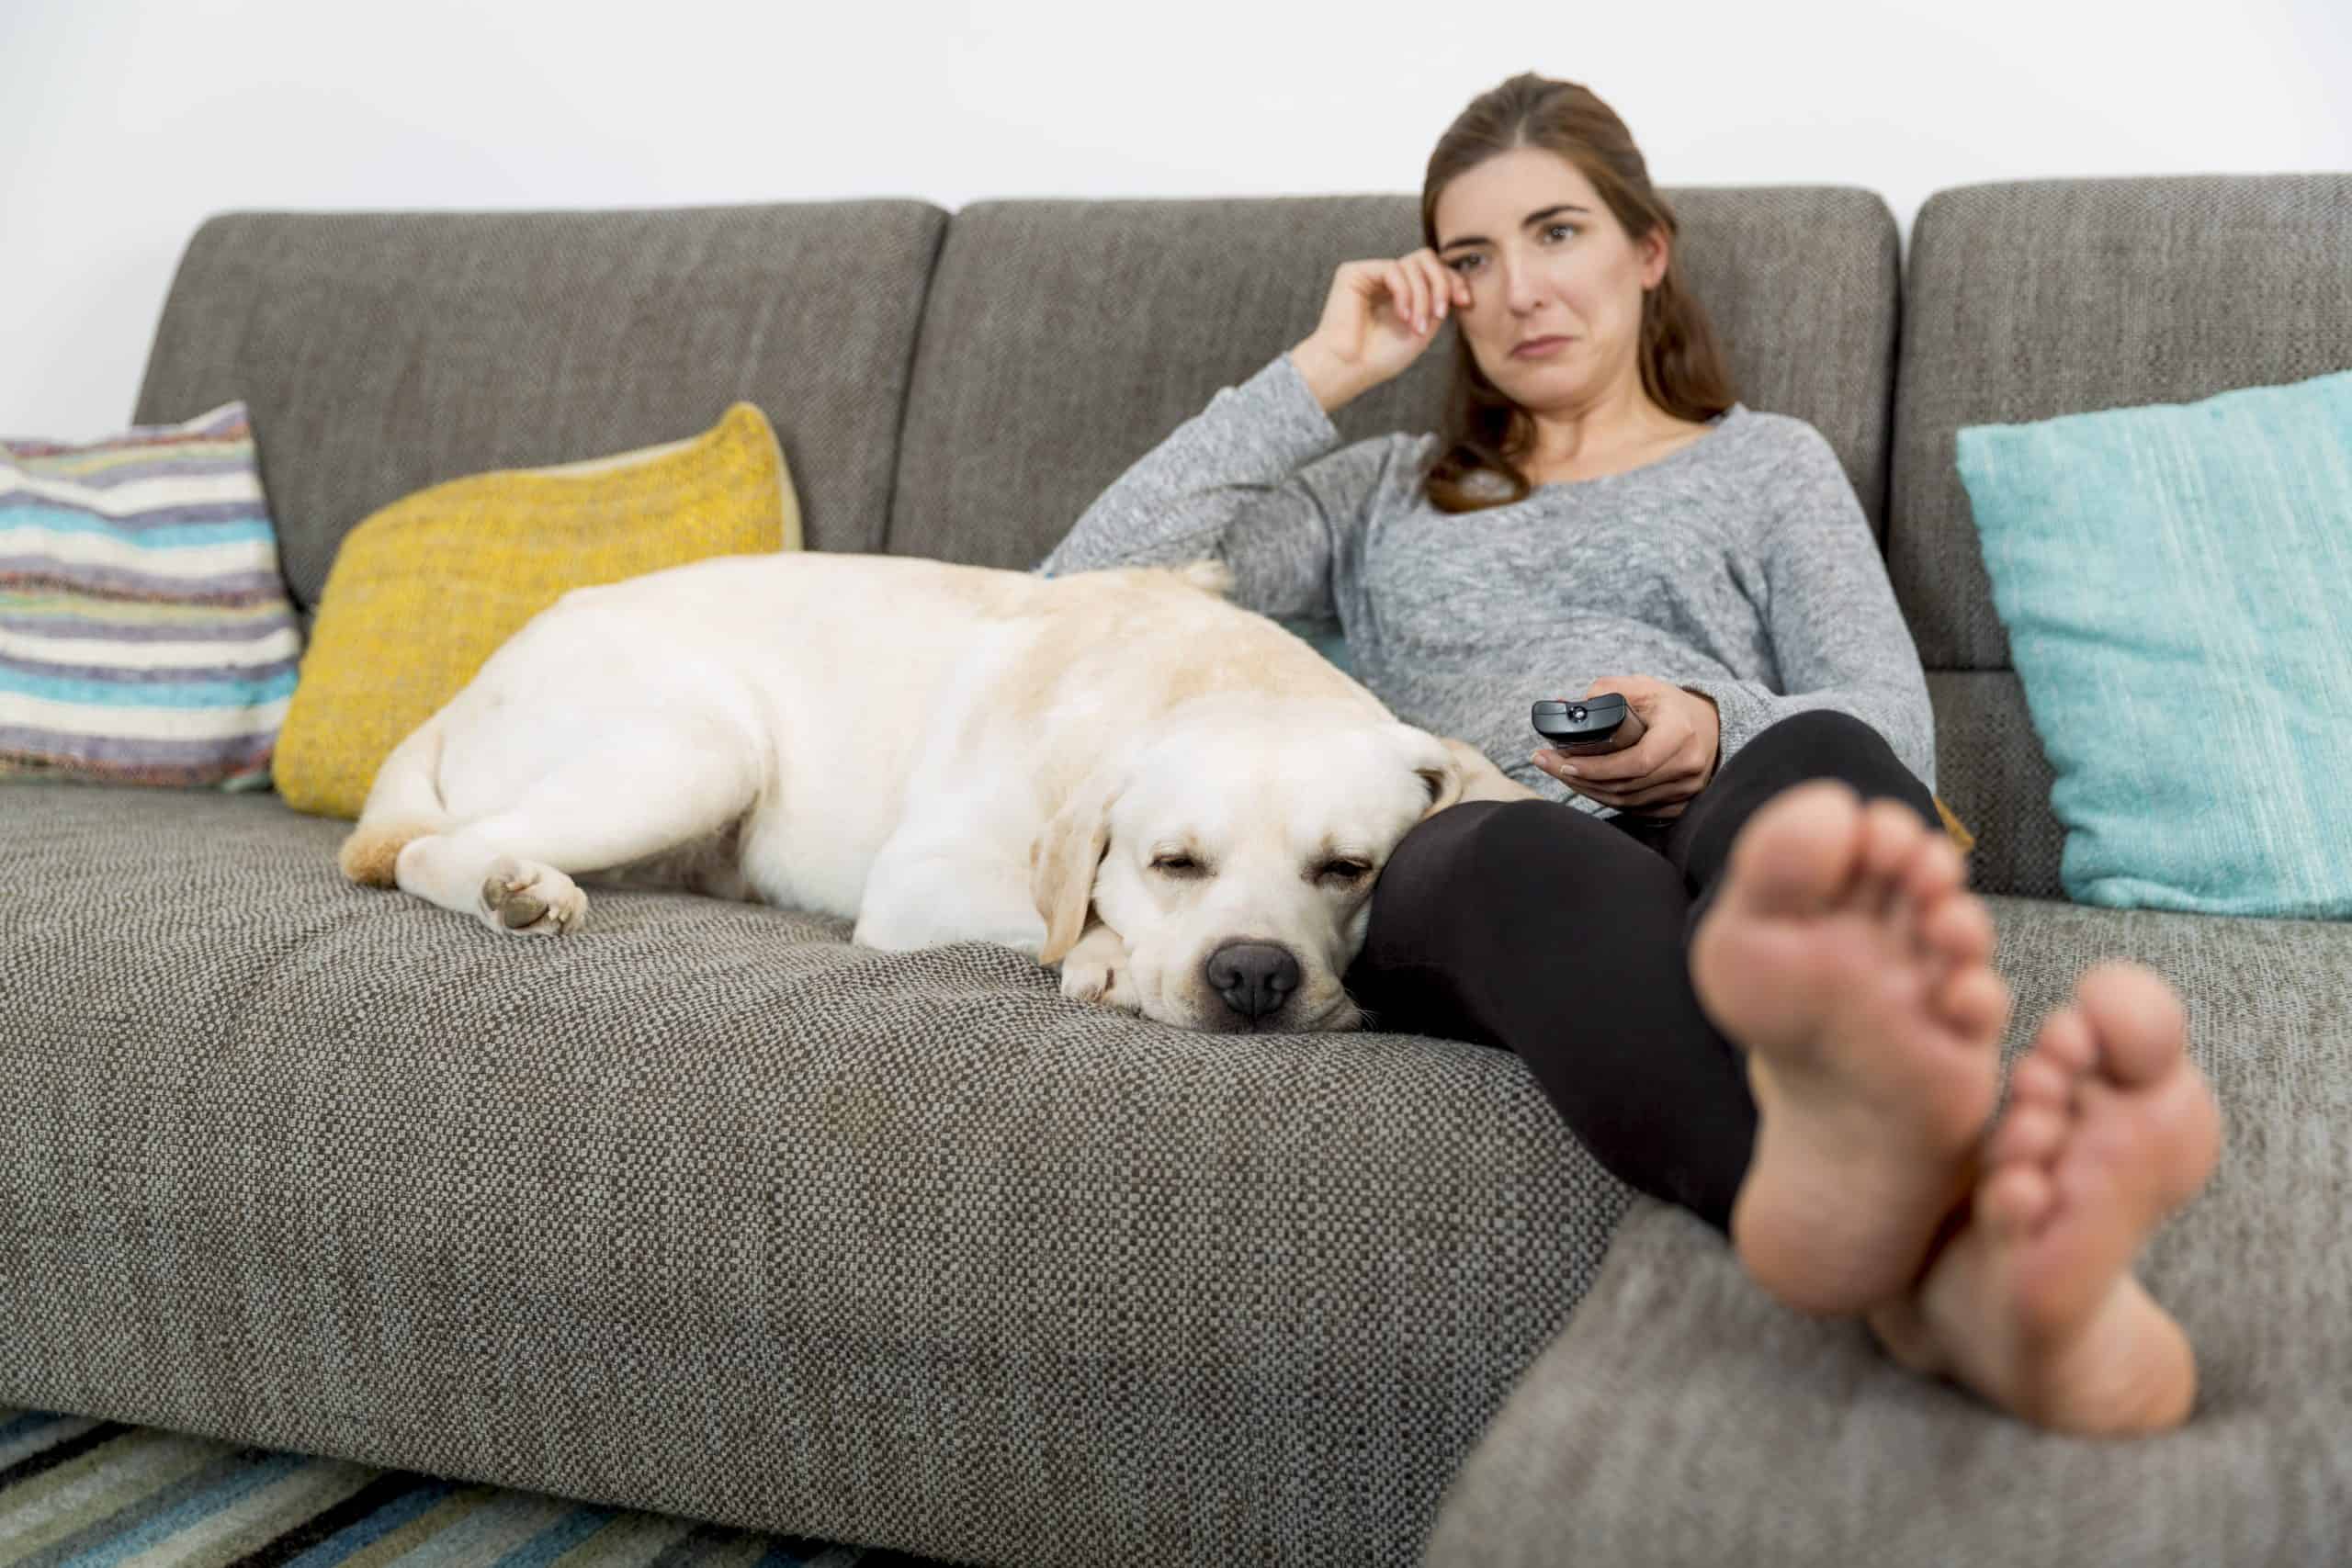 Woman sits on couch with Labrador retriever. With pet parents spending more time with their pets, the Banfield Pet Hospital study shows 33 percent think their dogs are happier and 35 percent are more playful than before the pandemic started.